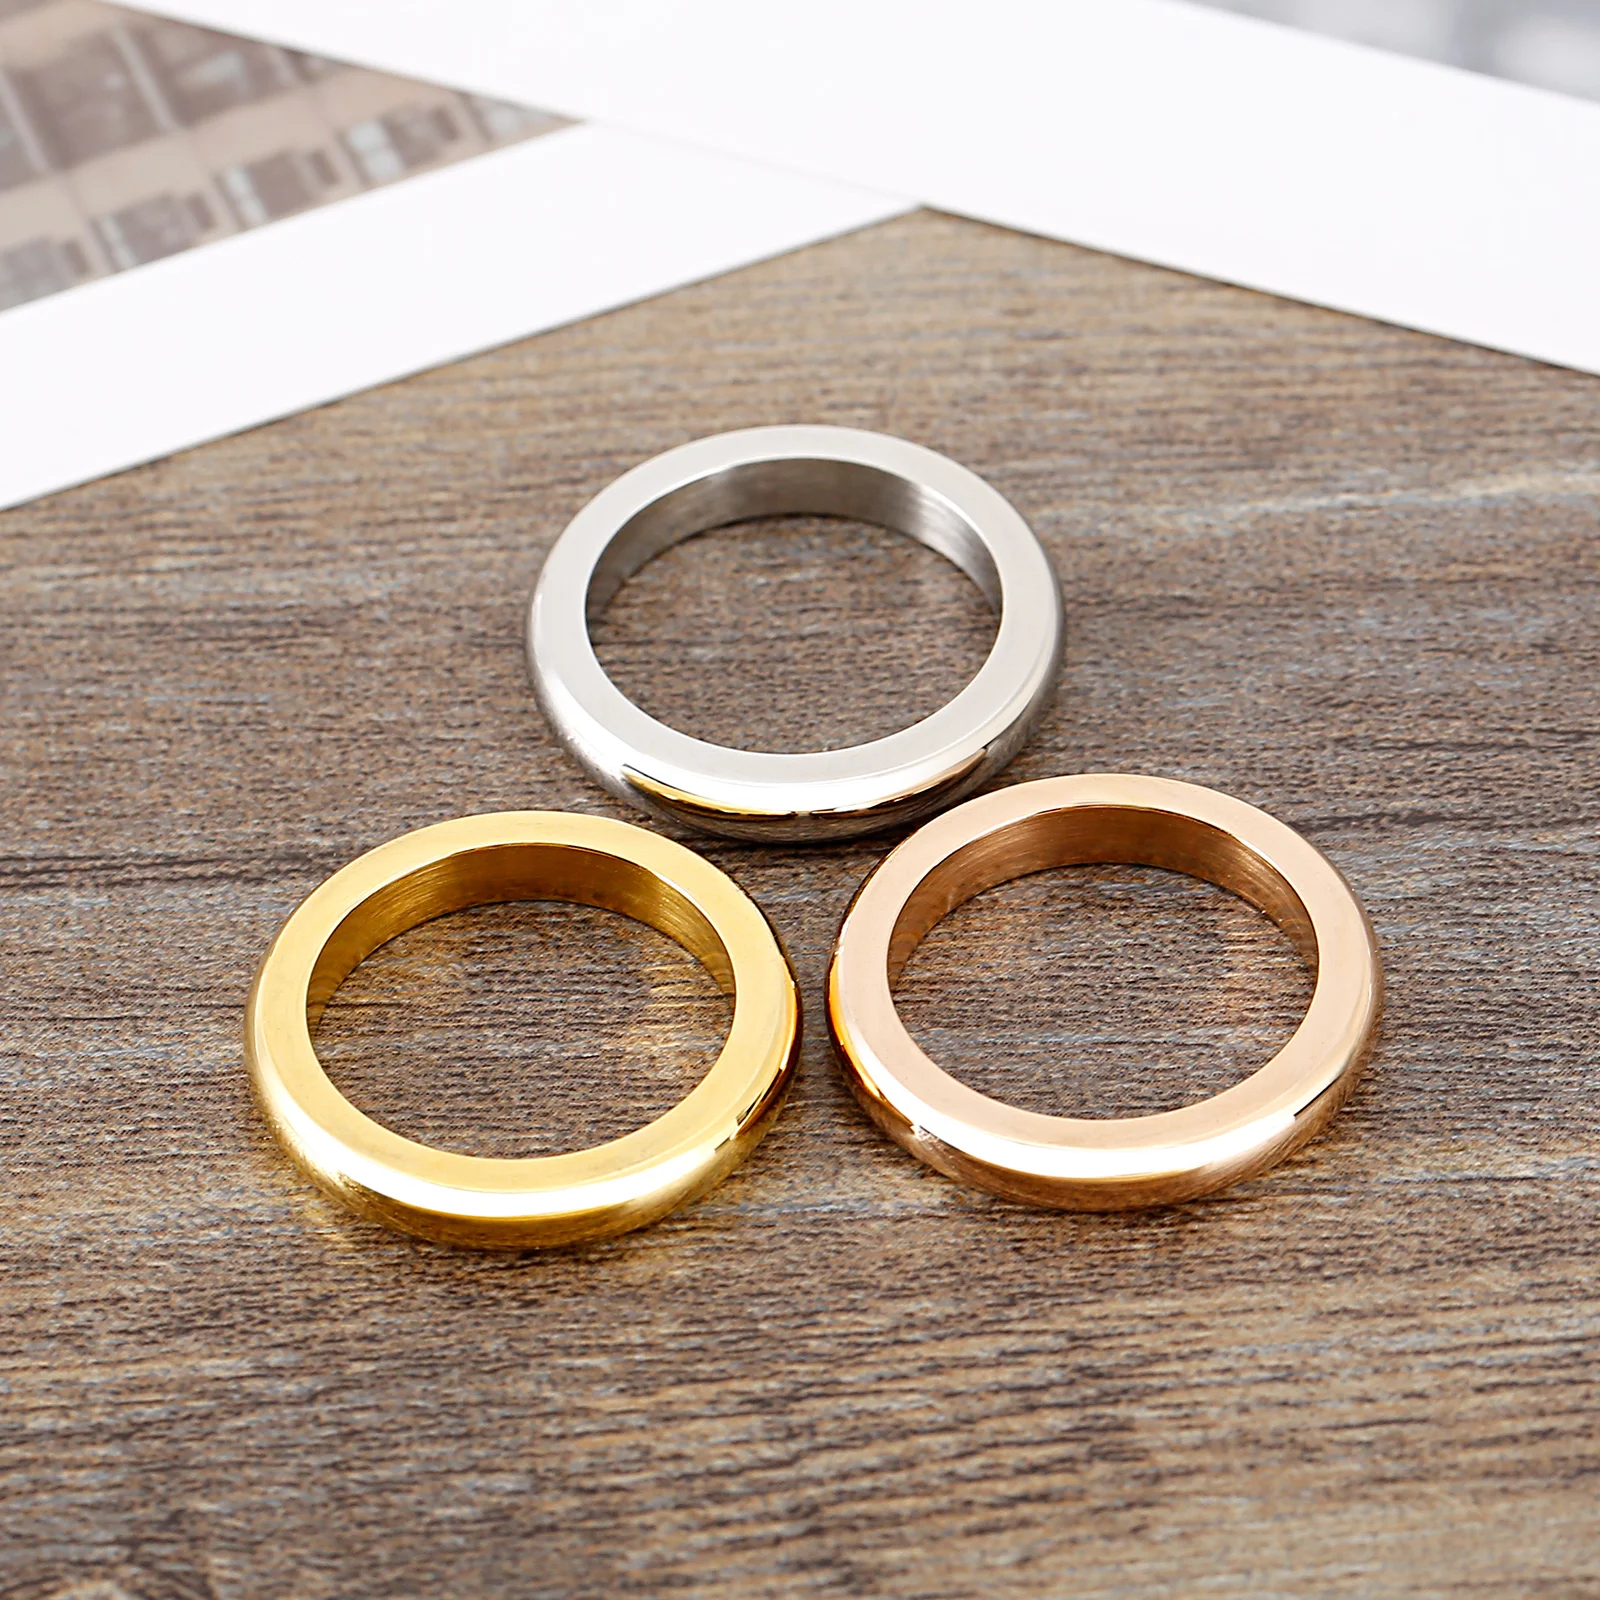 Stainless Steel Tricolor Smooth Round Ring For Women Fashion Simple Jewelry Accessories